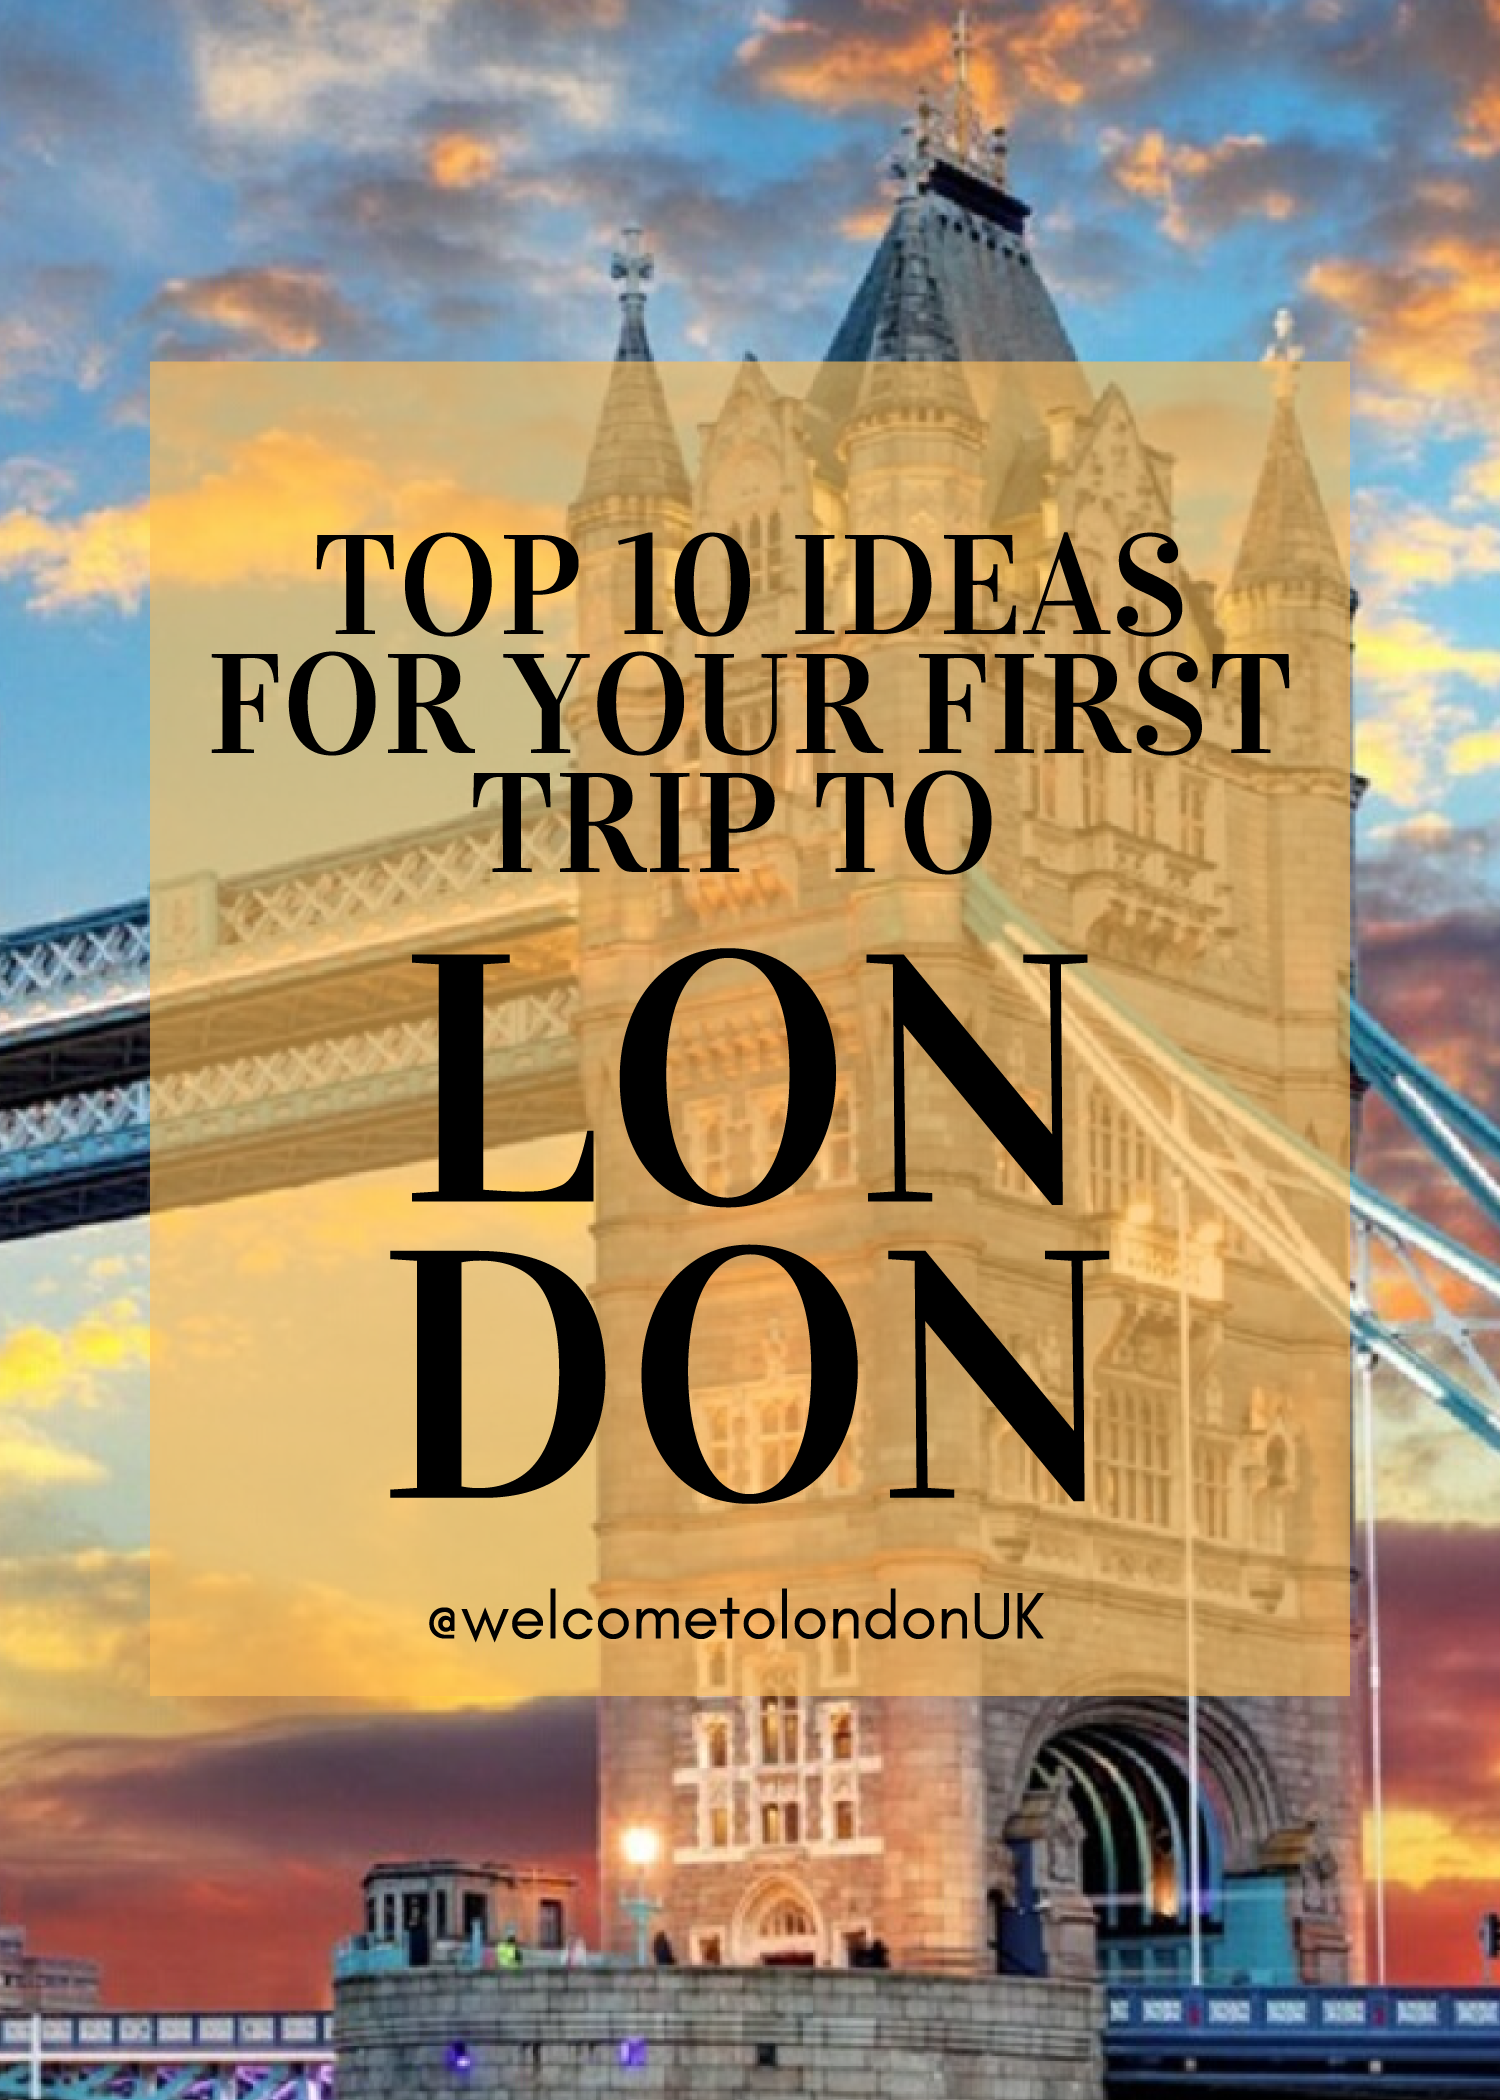 Ideas for your first trip to London